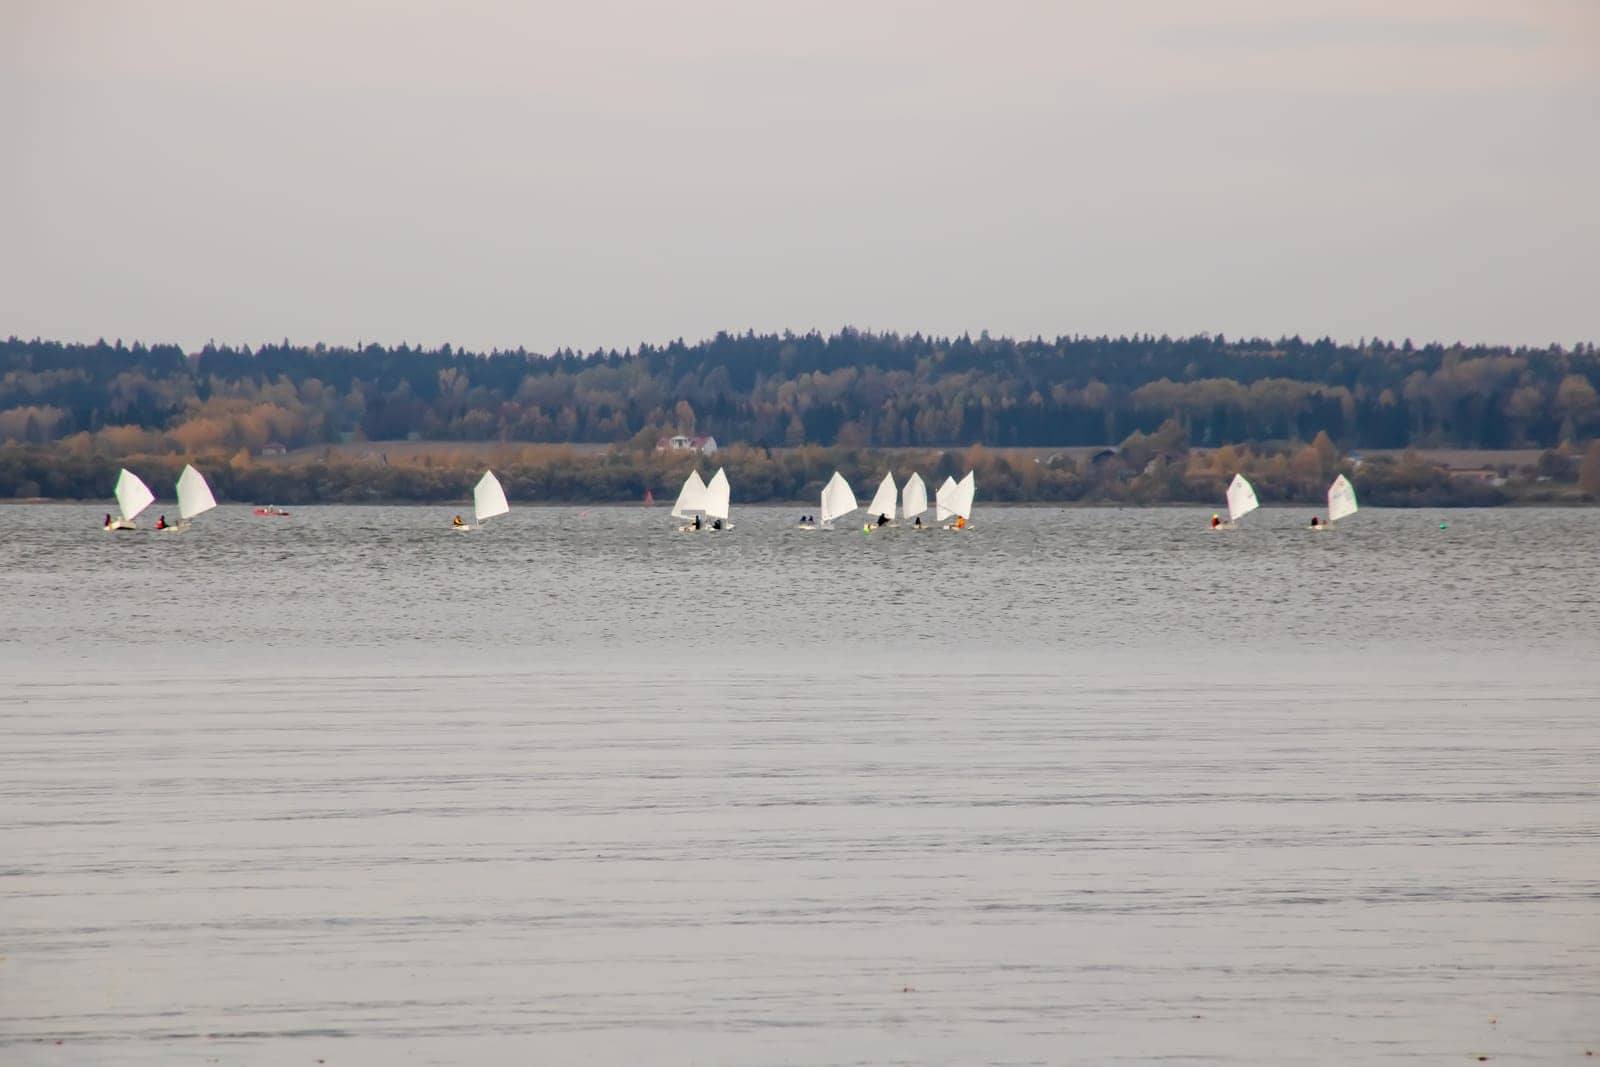 Boats with sails on the surface of the lake